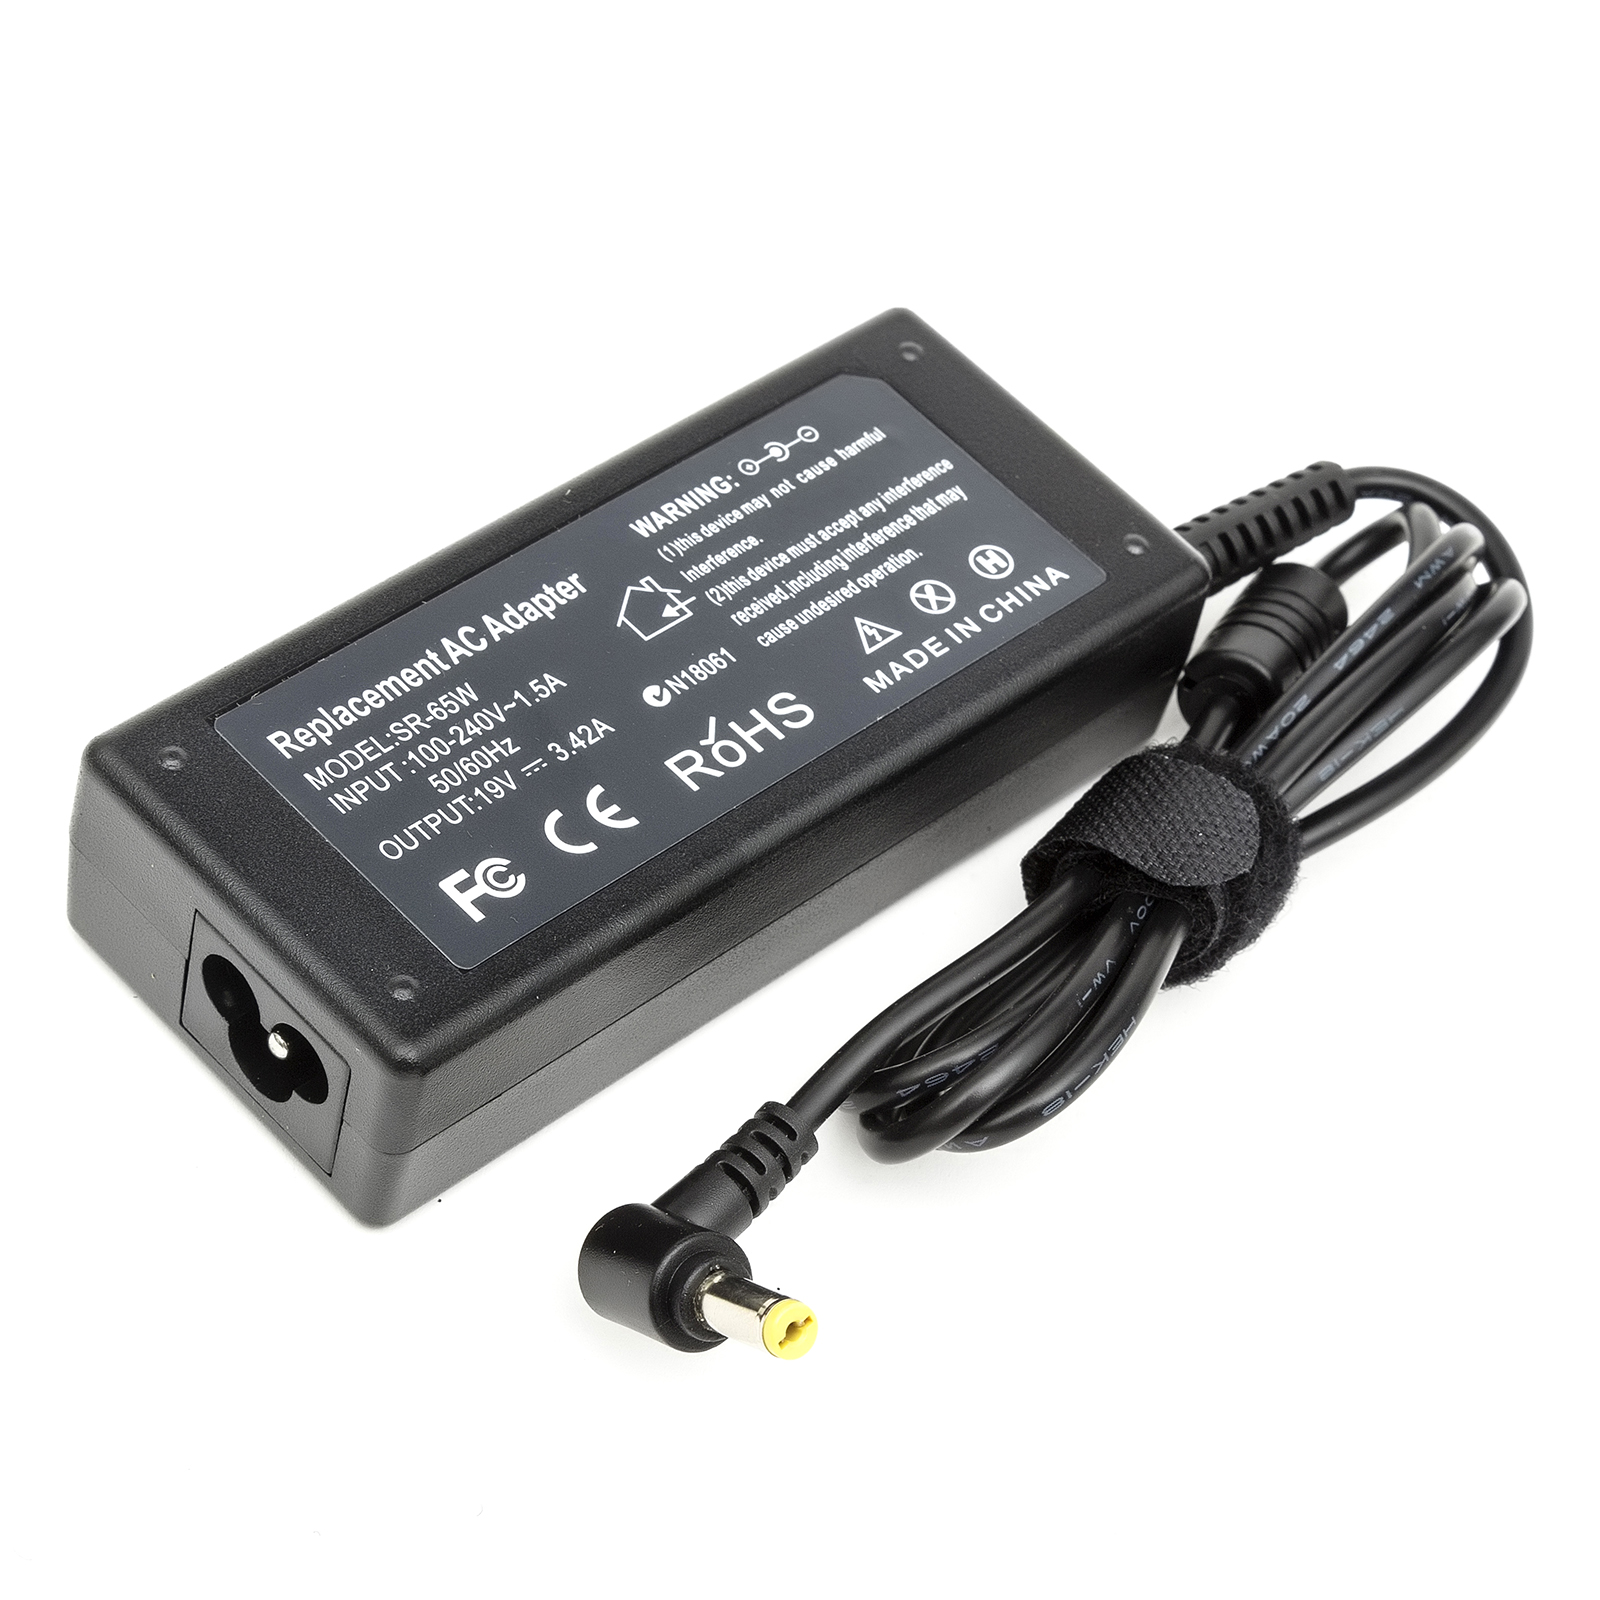 Laptop Charger 19v 3.42A 65W Power Pack Supply Fits Acer Aspire Models